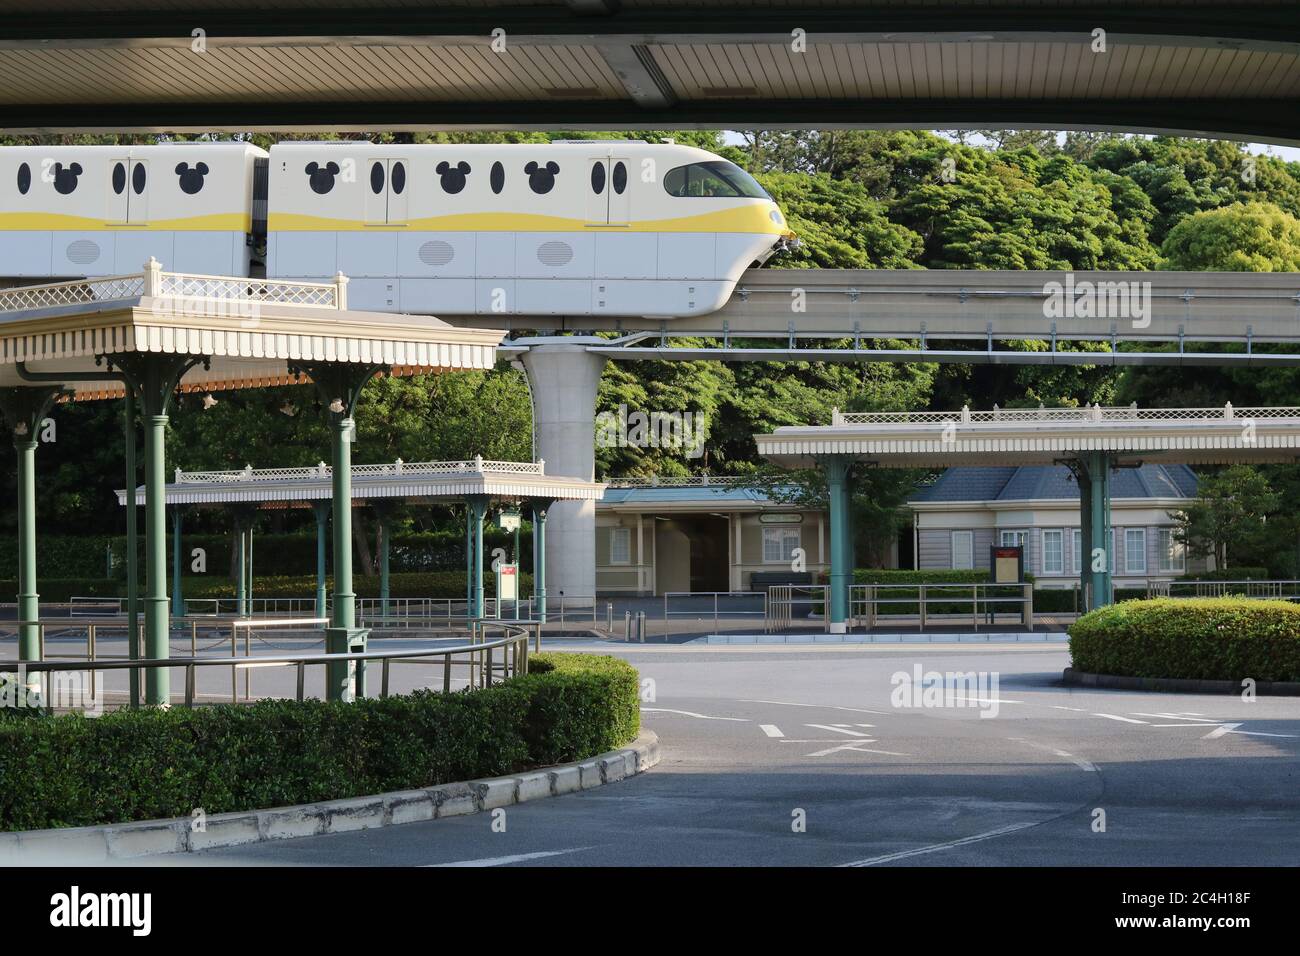 Monorail train running in Tokyo Disneyland. There are no people around because the park is temporarily closed during coronavirus outbreak. (May 2020) Stock Photo